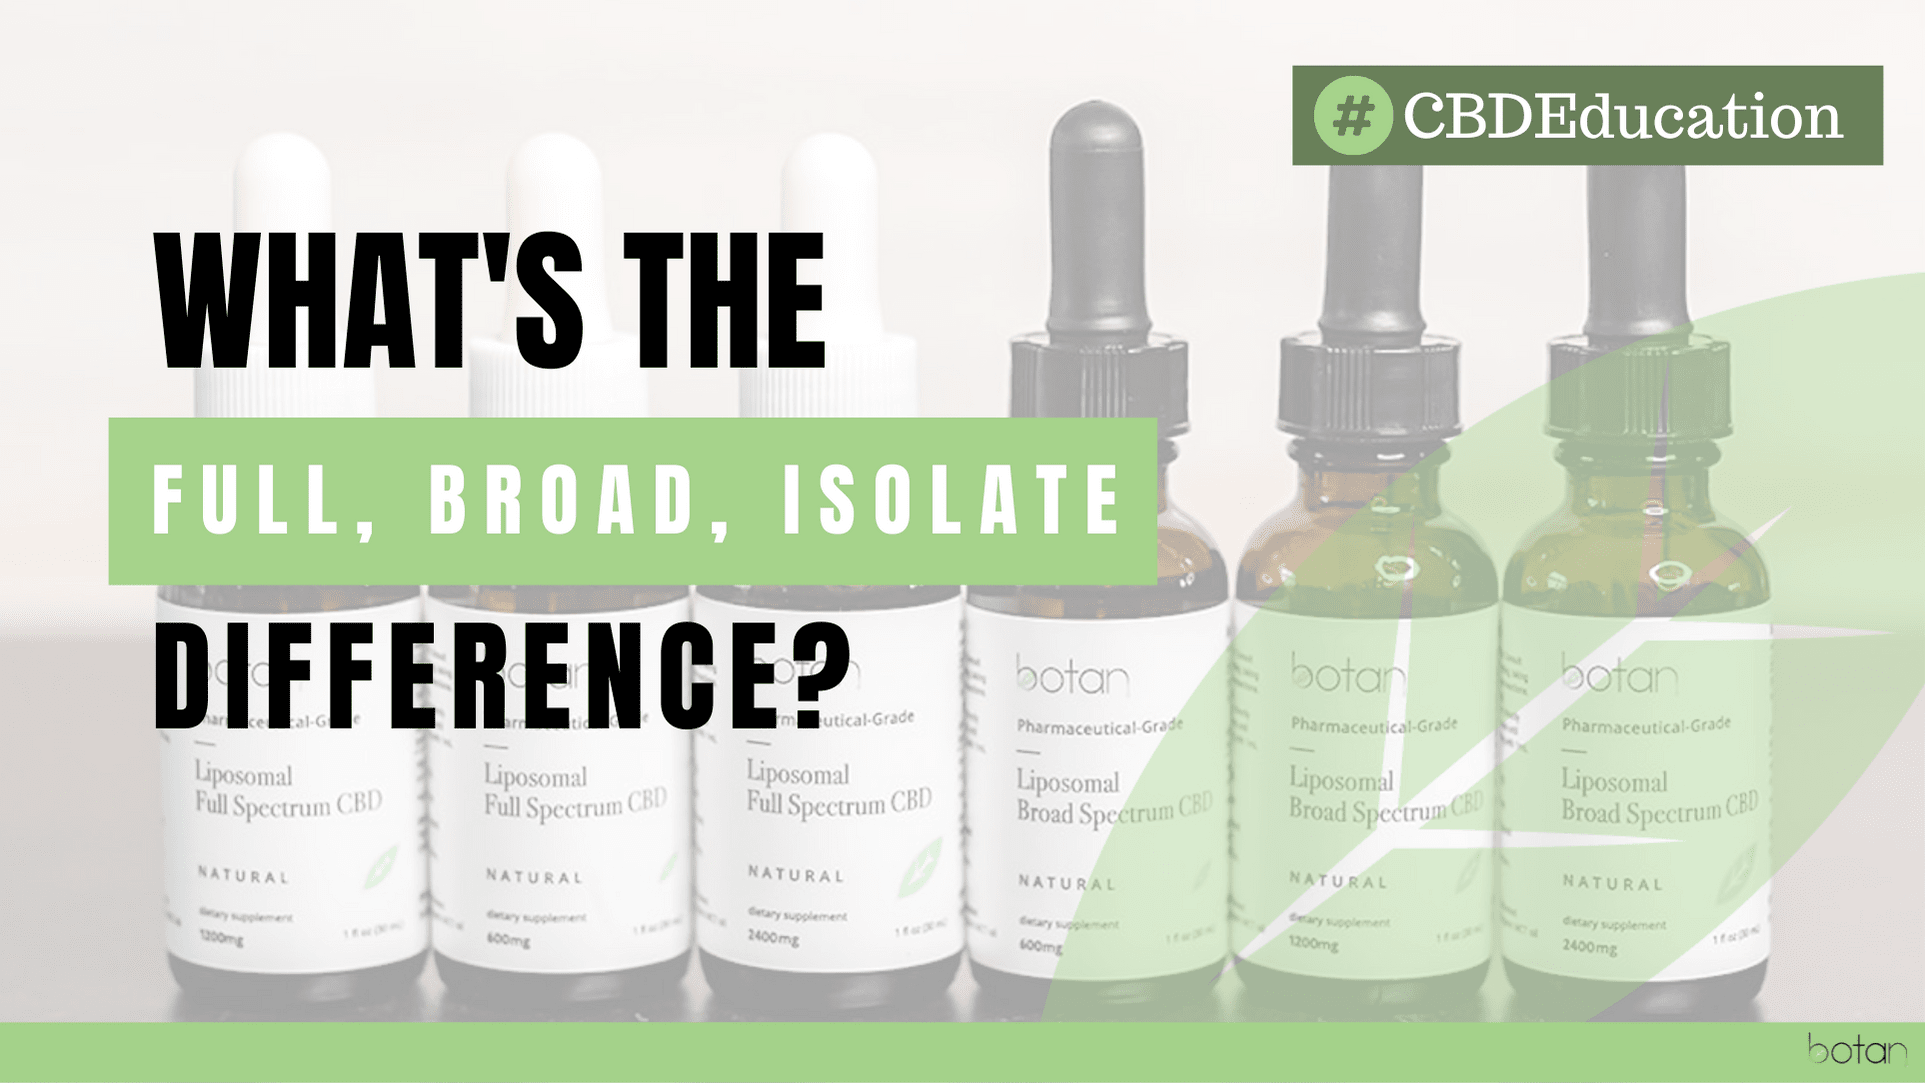 cbd broad full isolate difference